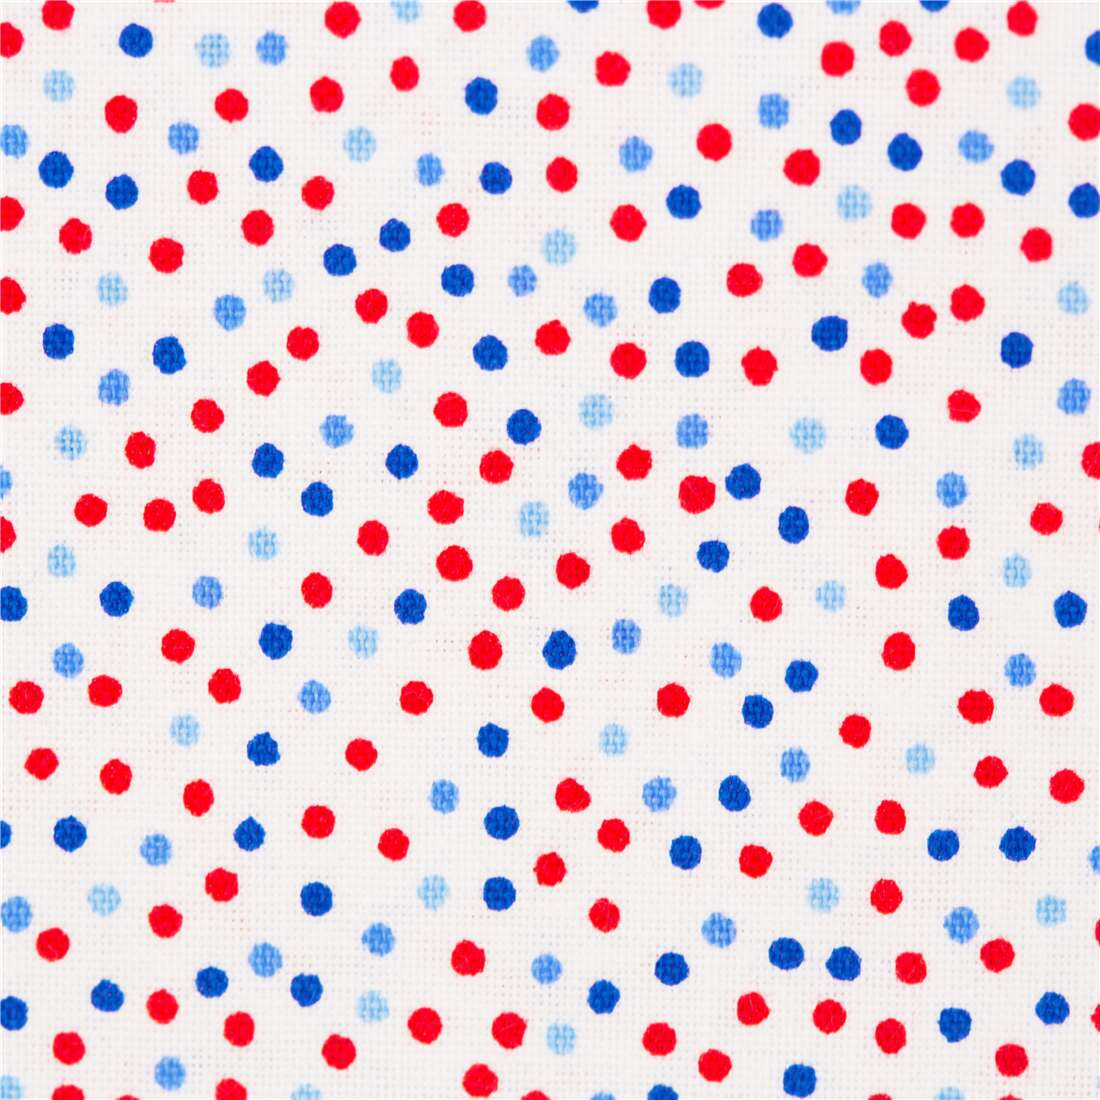 white and blue pattern background